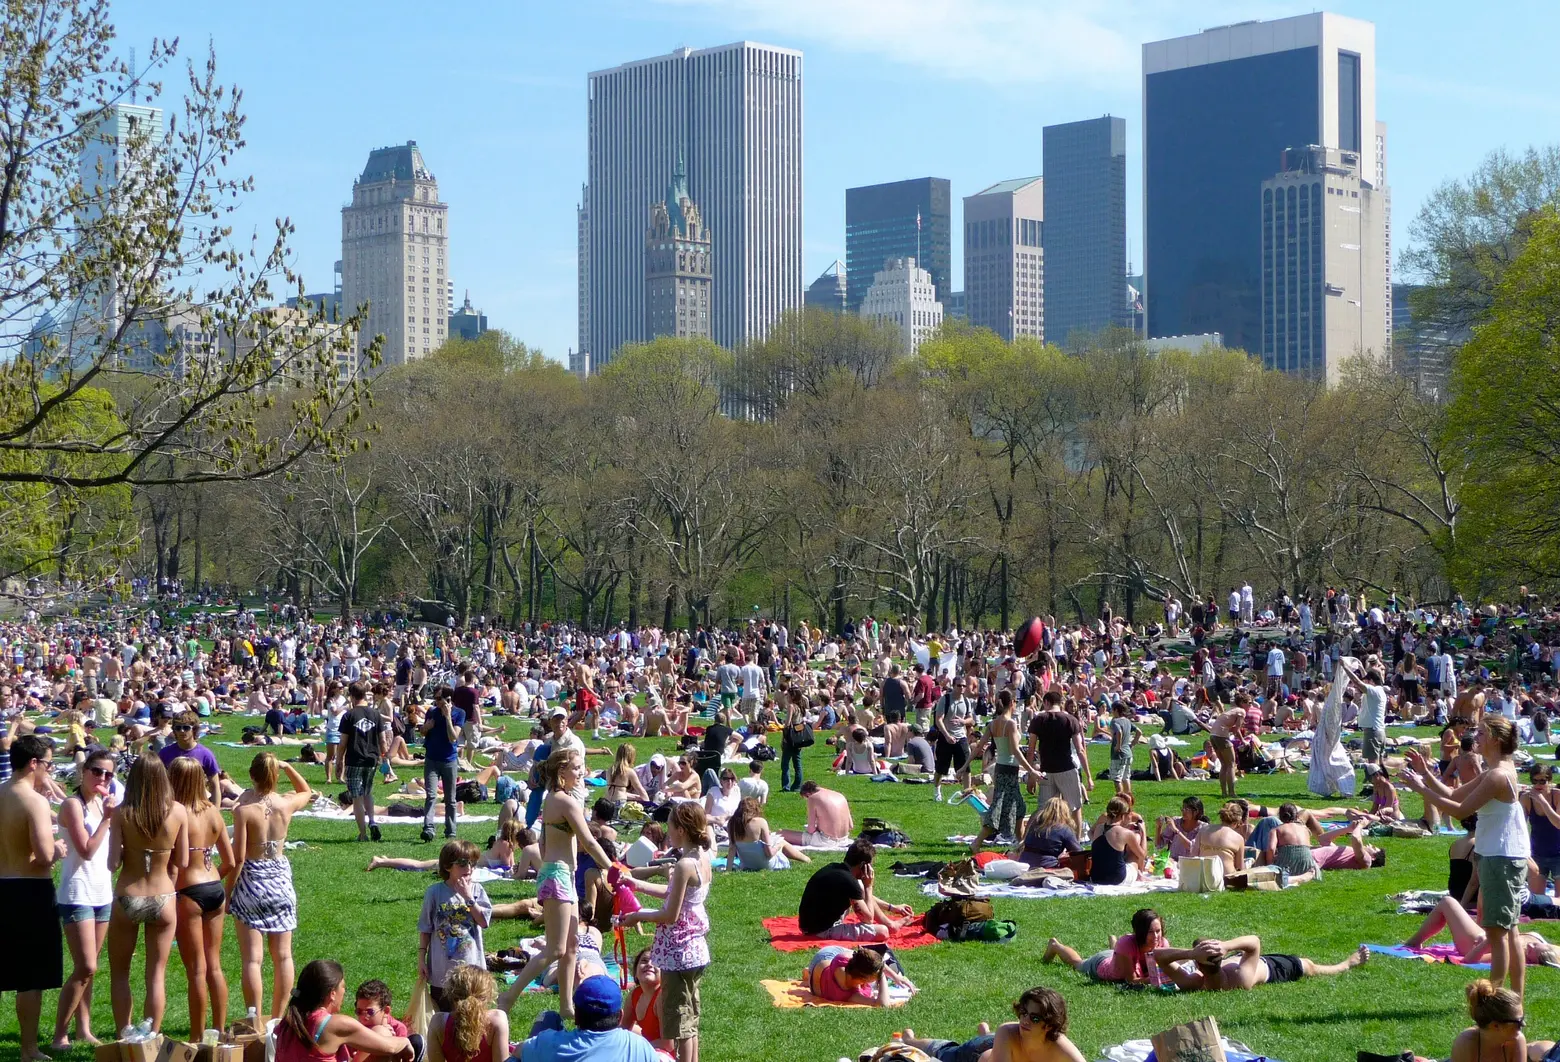 POLL: Have You Noticed Overcrowding in City Parks?